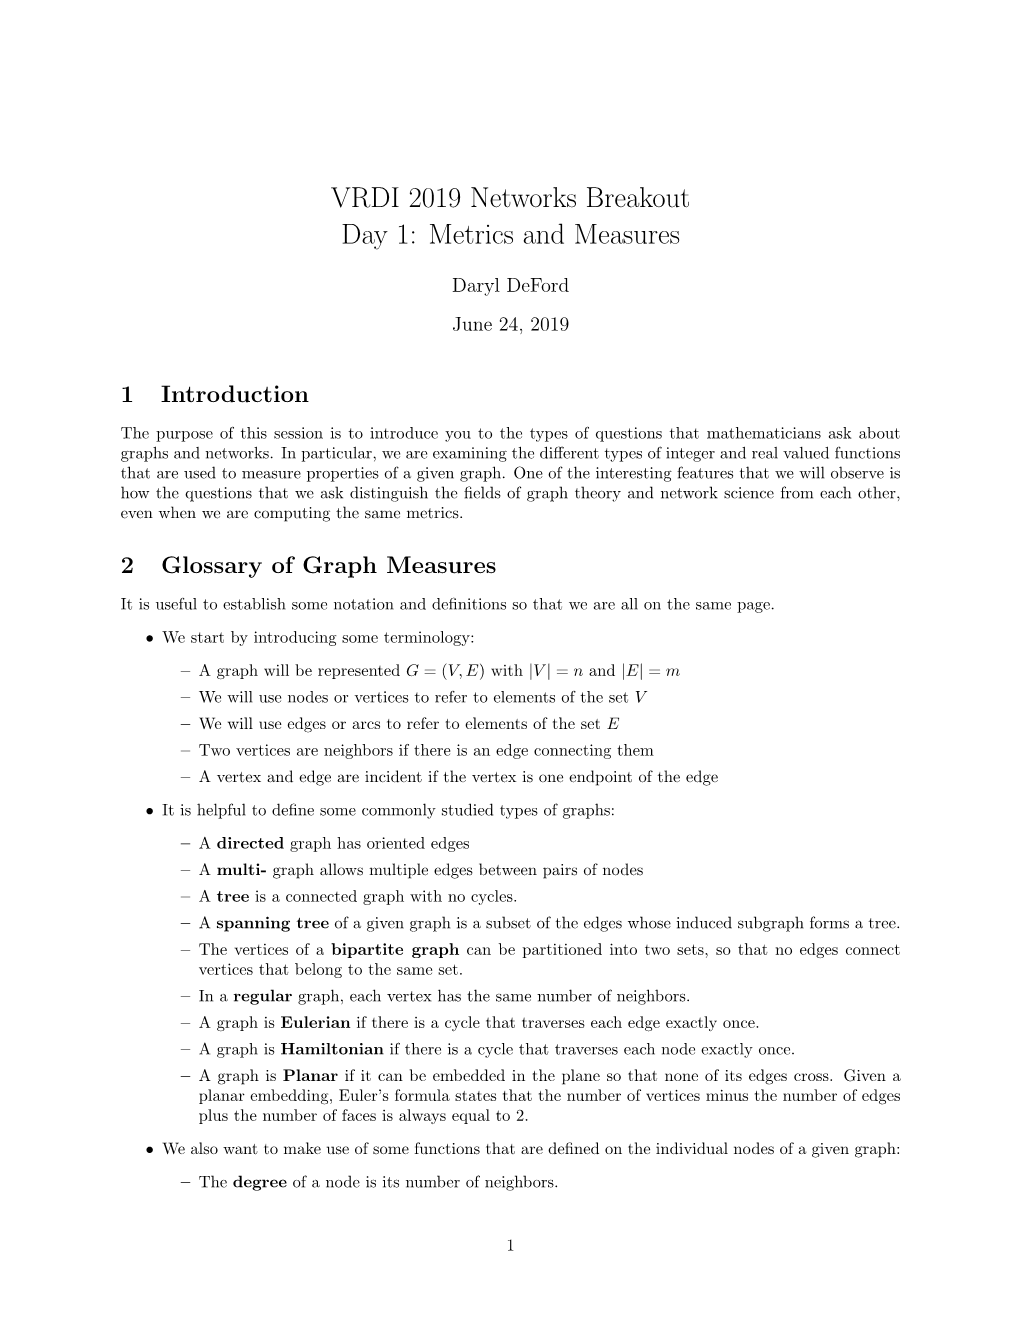 VRDI 2019 Networks Breakout Day 1: Metrics and Measures